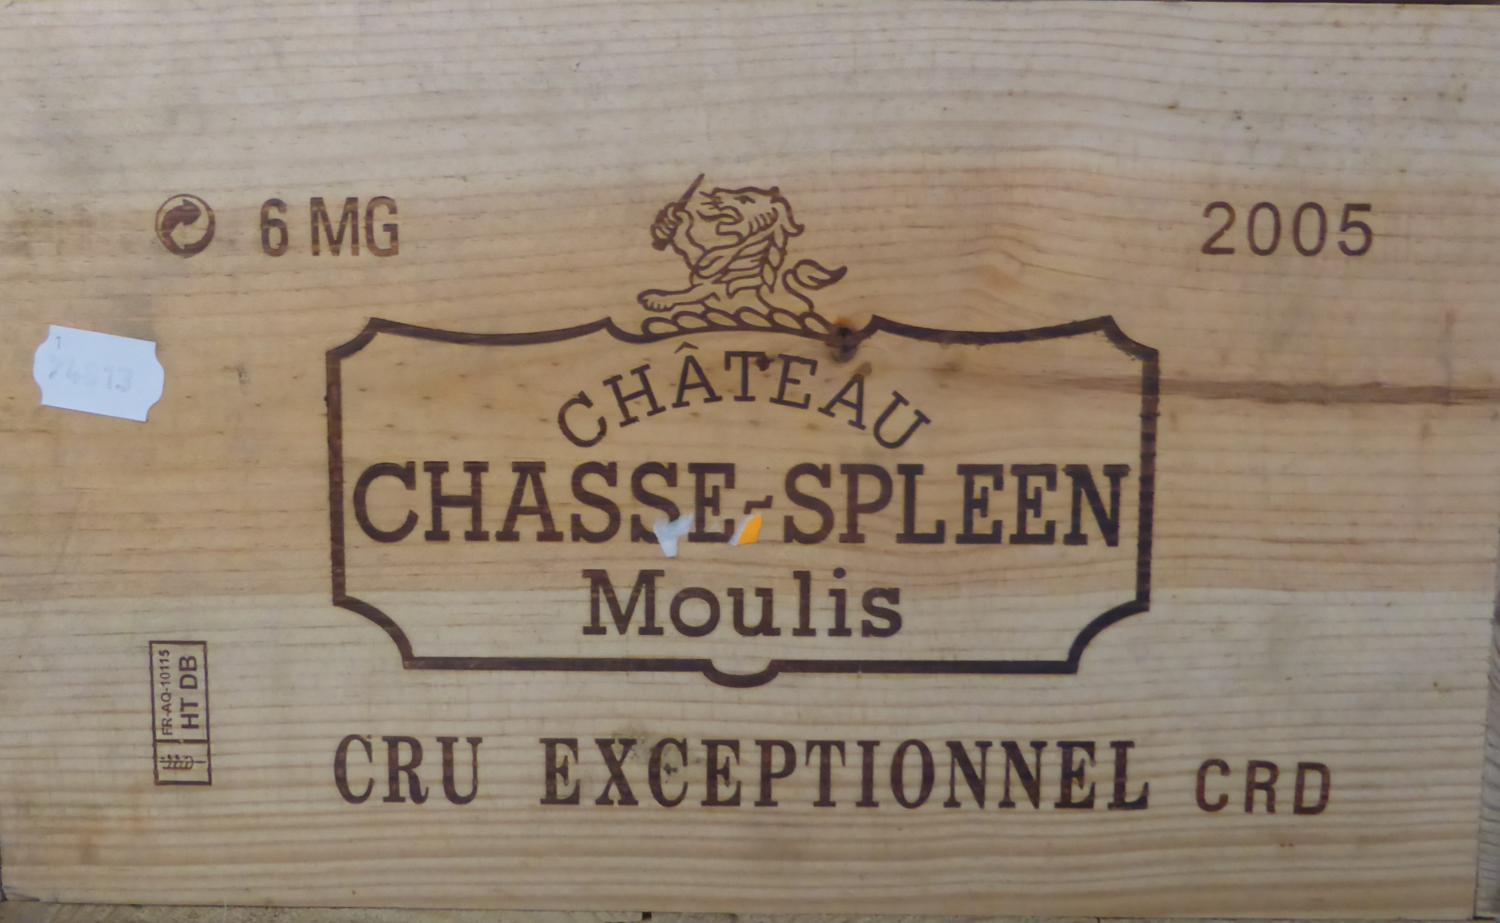 Chateau Chasse Spleen 2005, Moulis en Medoc, magnums, owc (six magnums)